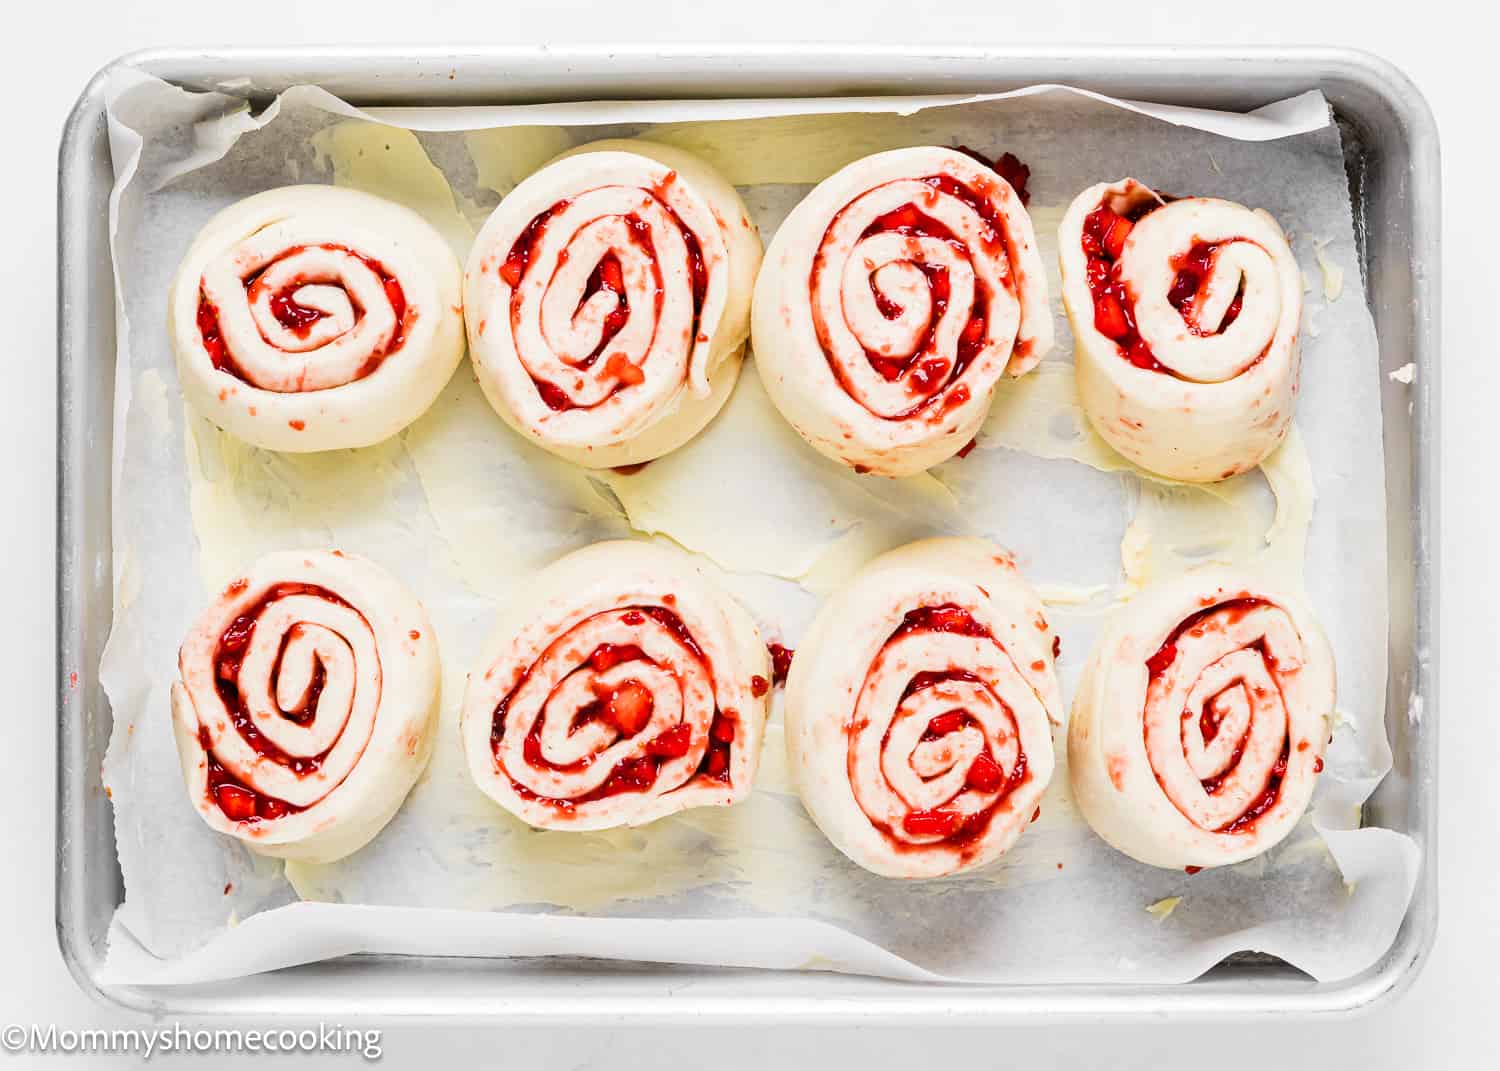 unbaked Strawberry Rolls in a baking tray.